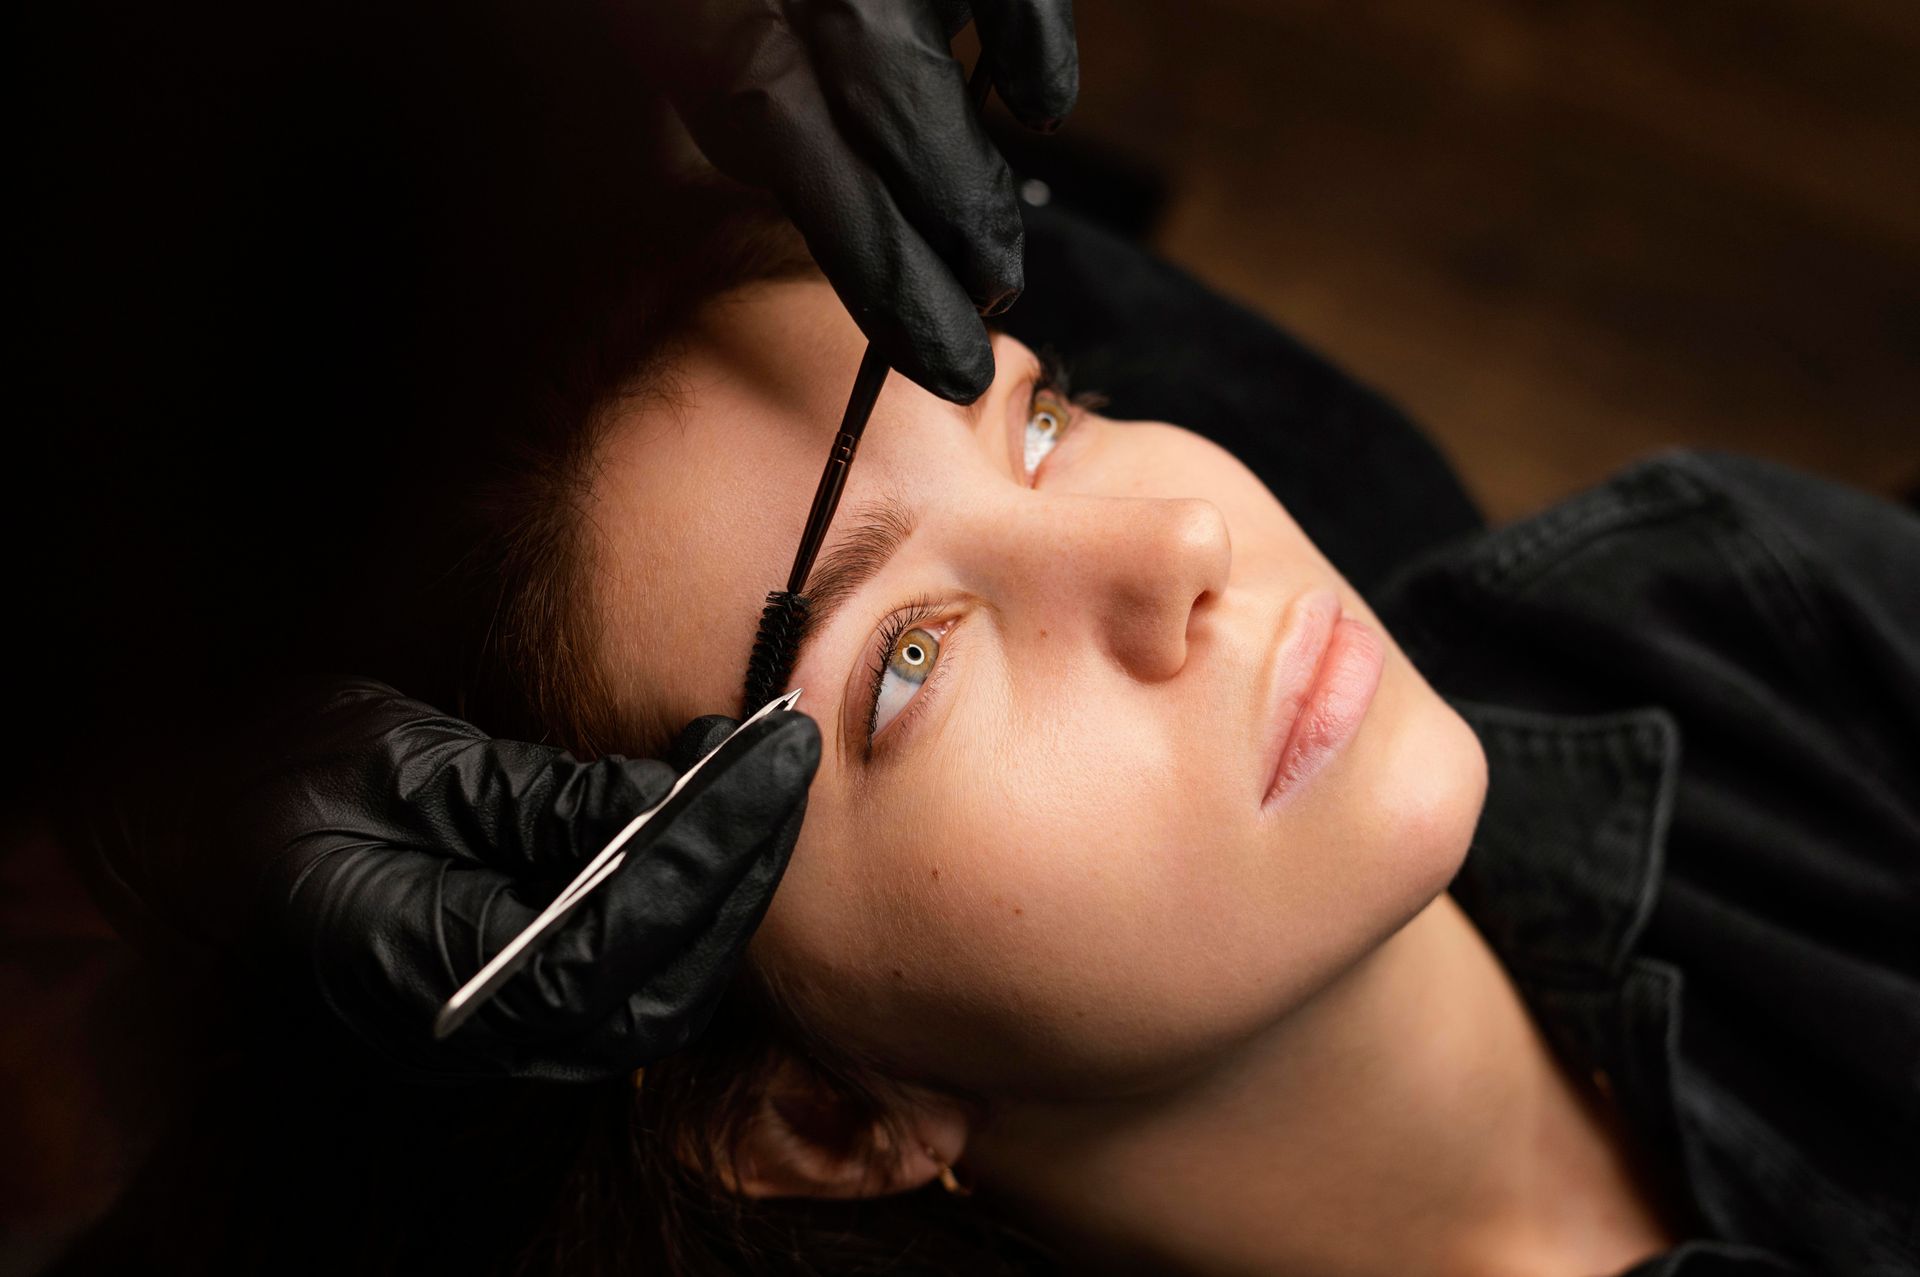 a woman is getting her eyebrows done by a person wearing black gloves